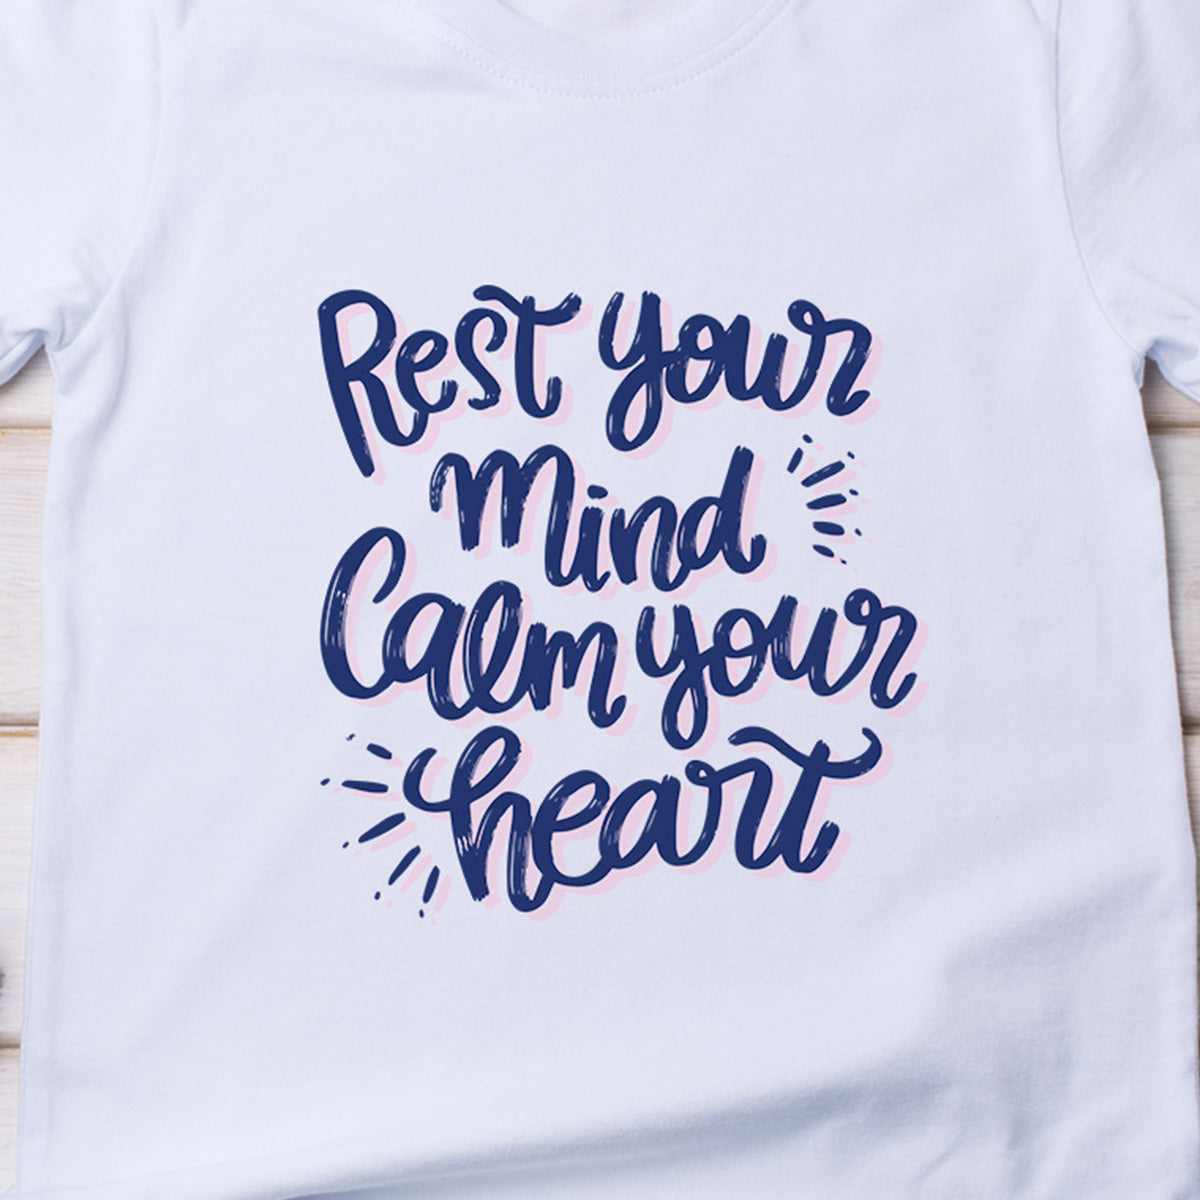 Rest Your Mind Calm Your Heart - Printed Cotton T- Shirt - White